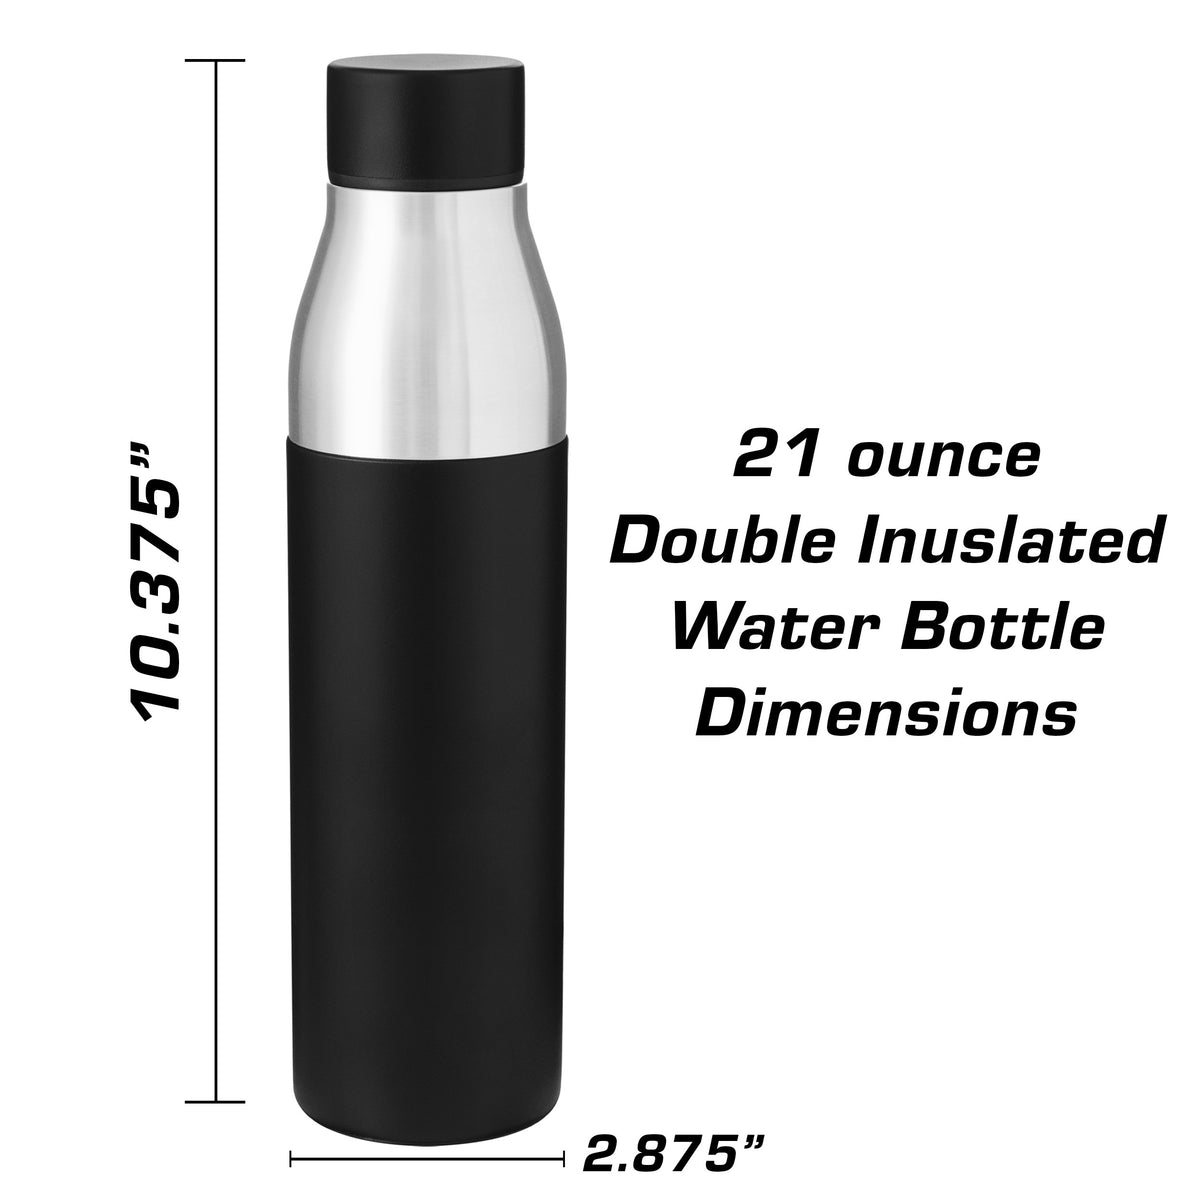 Audi Q7 Insulated Stainless Steel Water Bottle - 21 oz